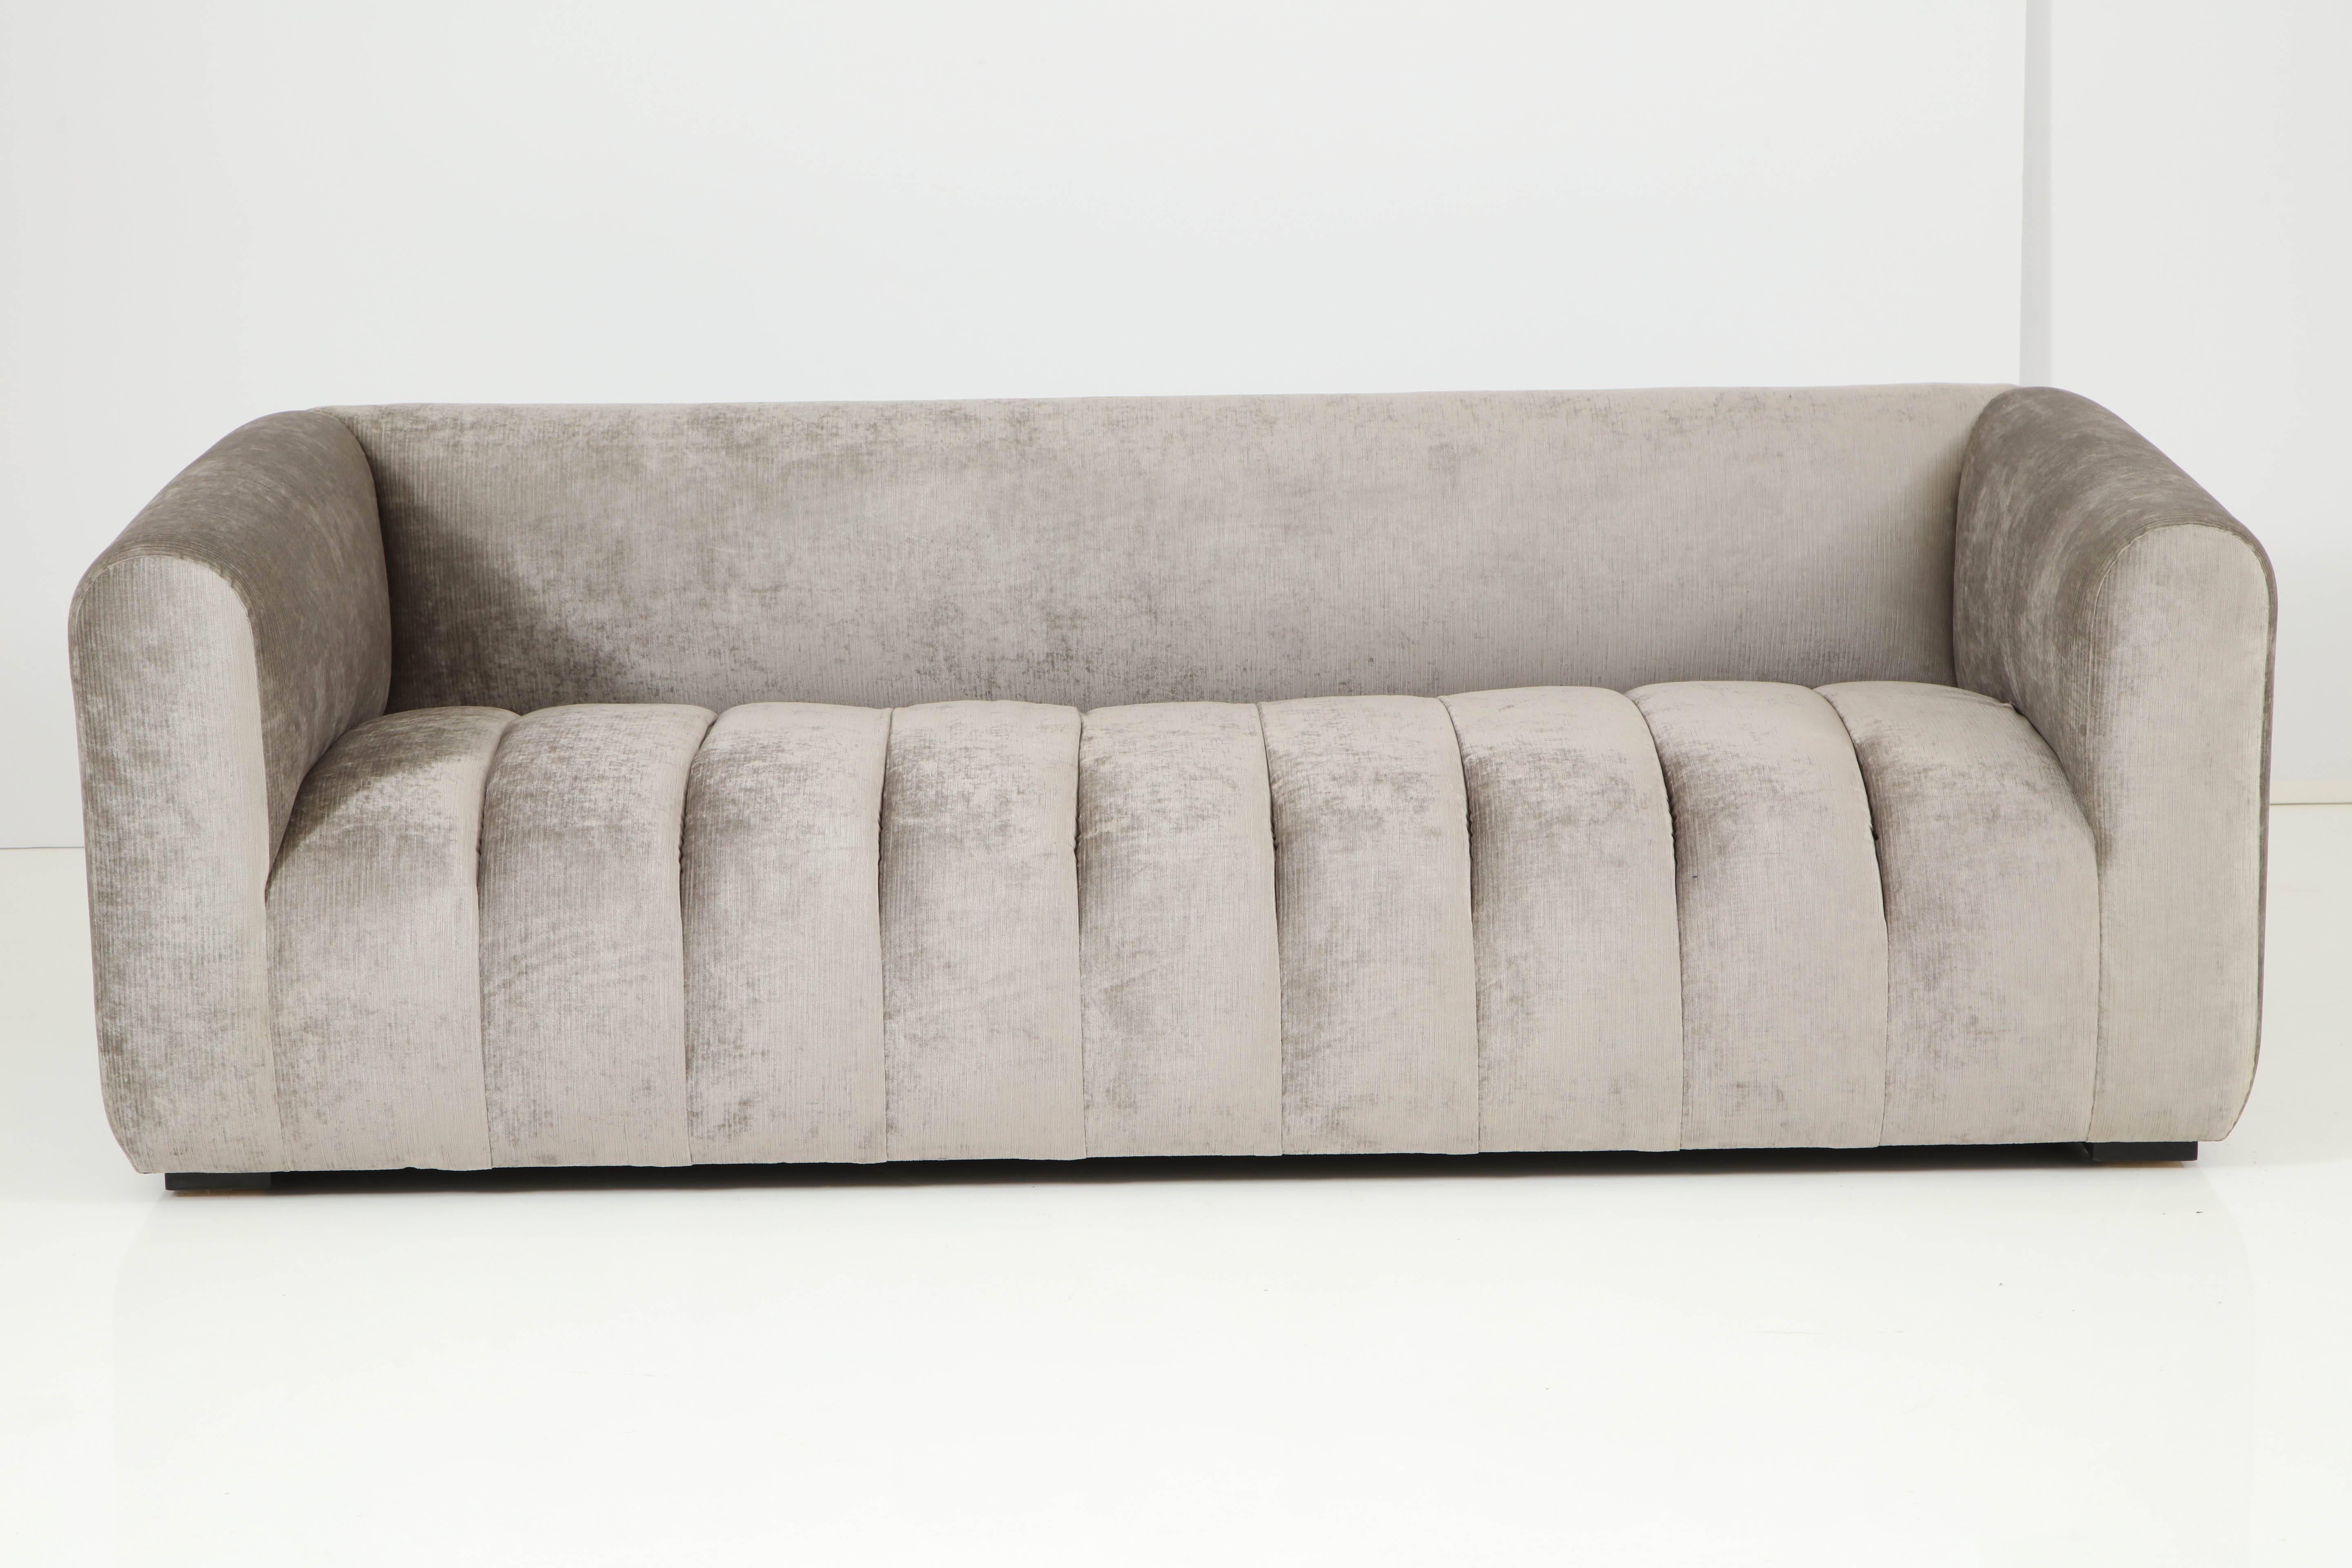 Stunning Channel Sofa by Steve Chase offered by Prime Gallery 3